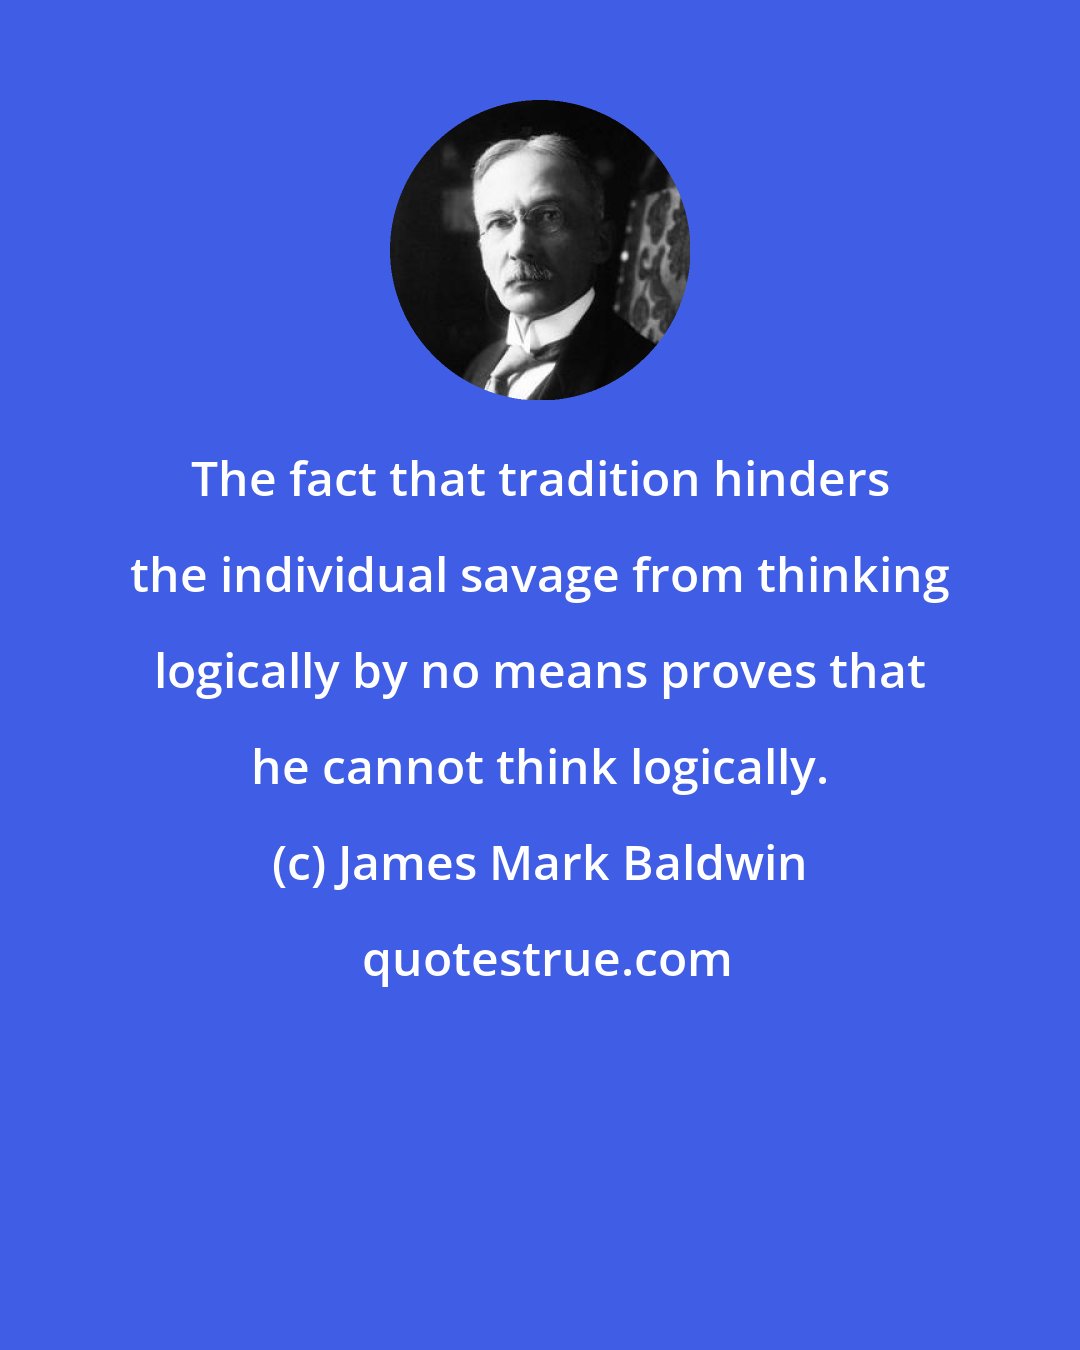 James Mark Baldwin: The fact that tradition hinders the individual savage from thinking logically by no means proves that he cannot think logically.